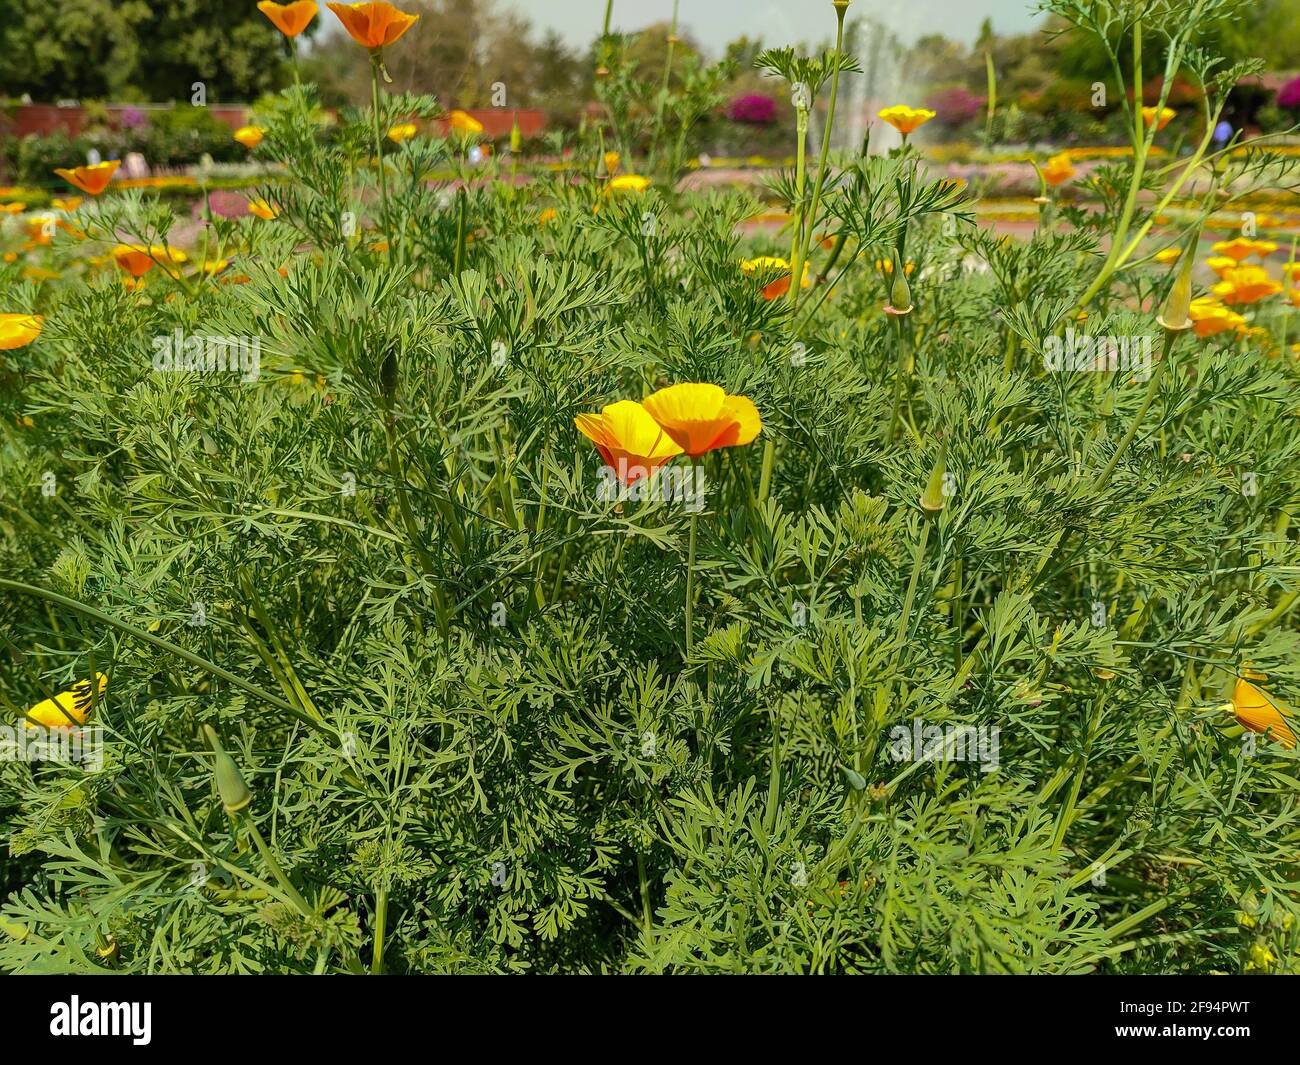 Yellow Eschscholzia lemmonii flowers grown in the park Stock Photo